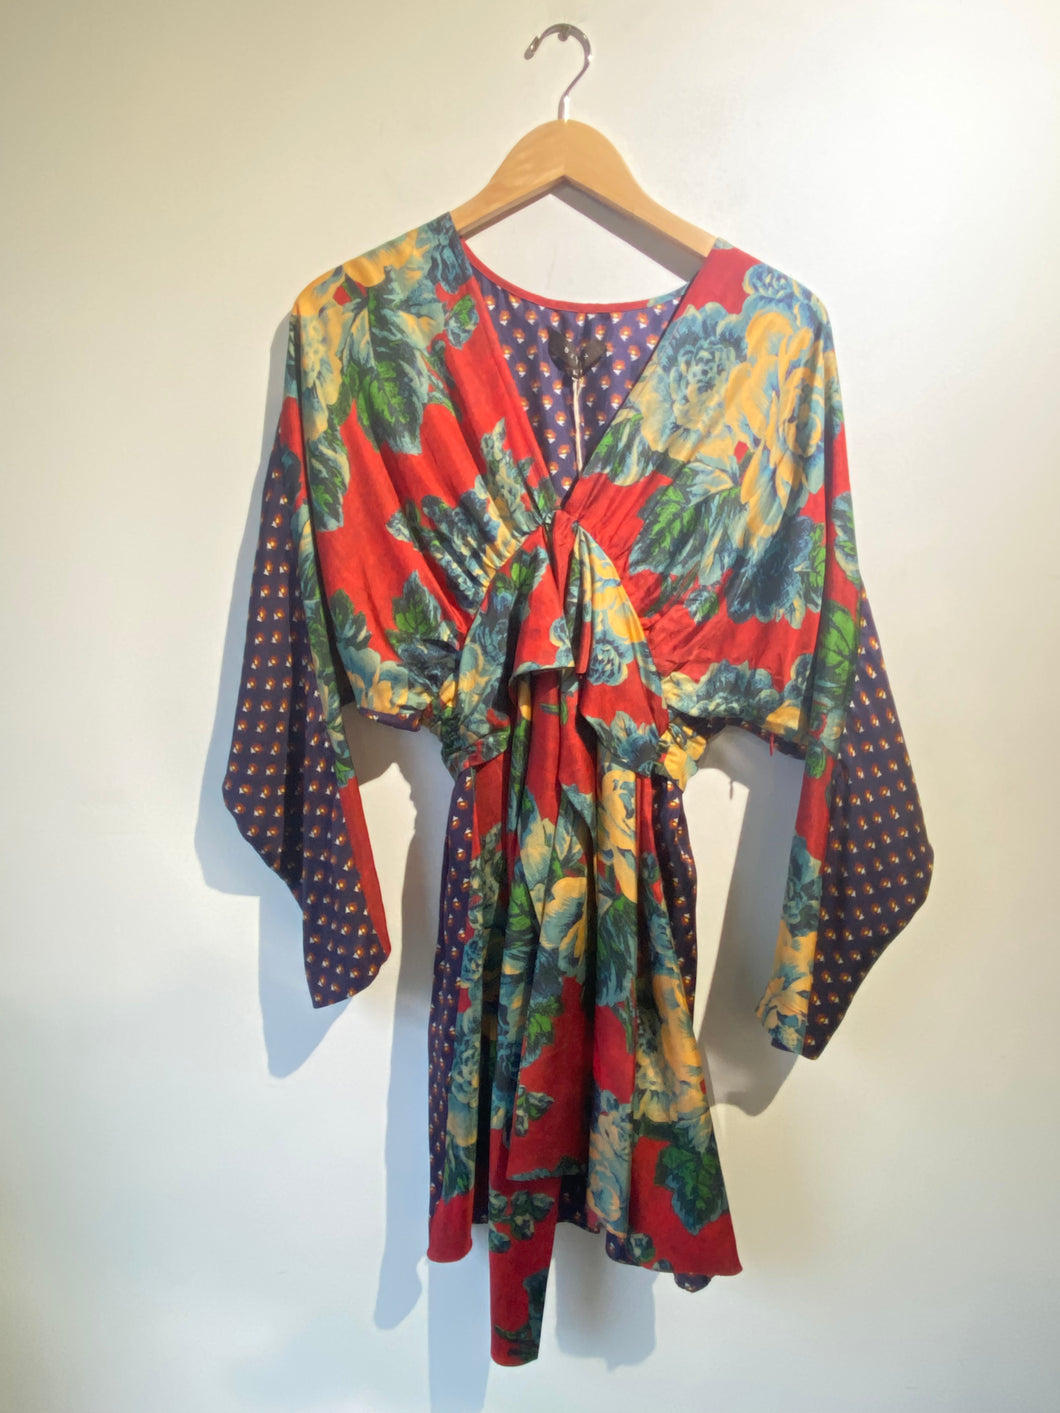 Biyan Floral Silk Dress with Tie - The Curatorial Dept.